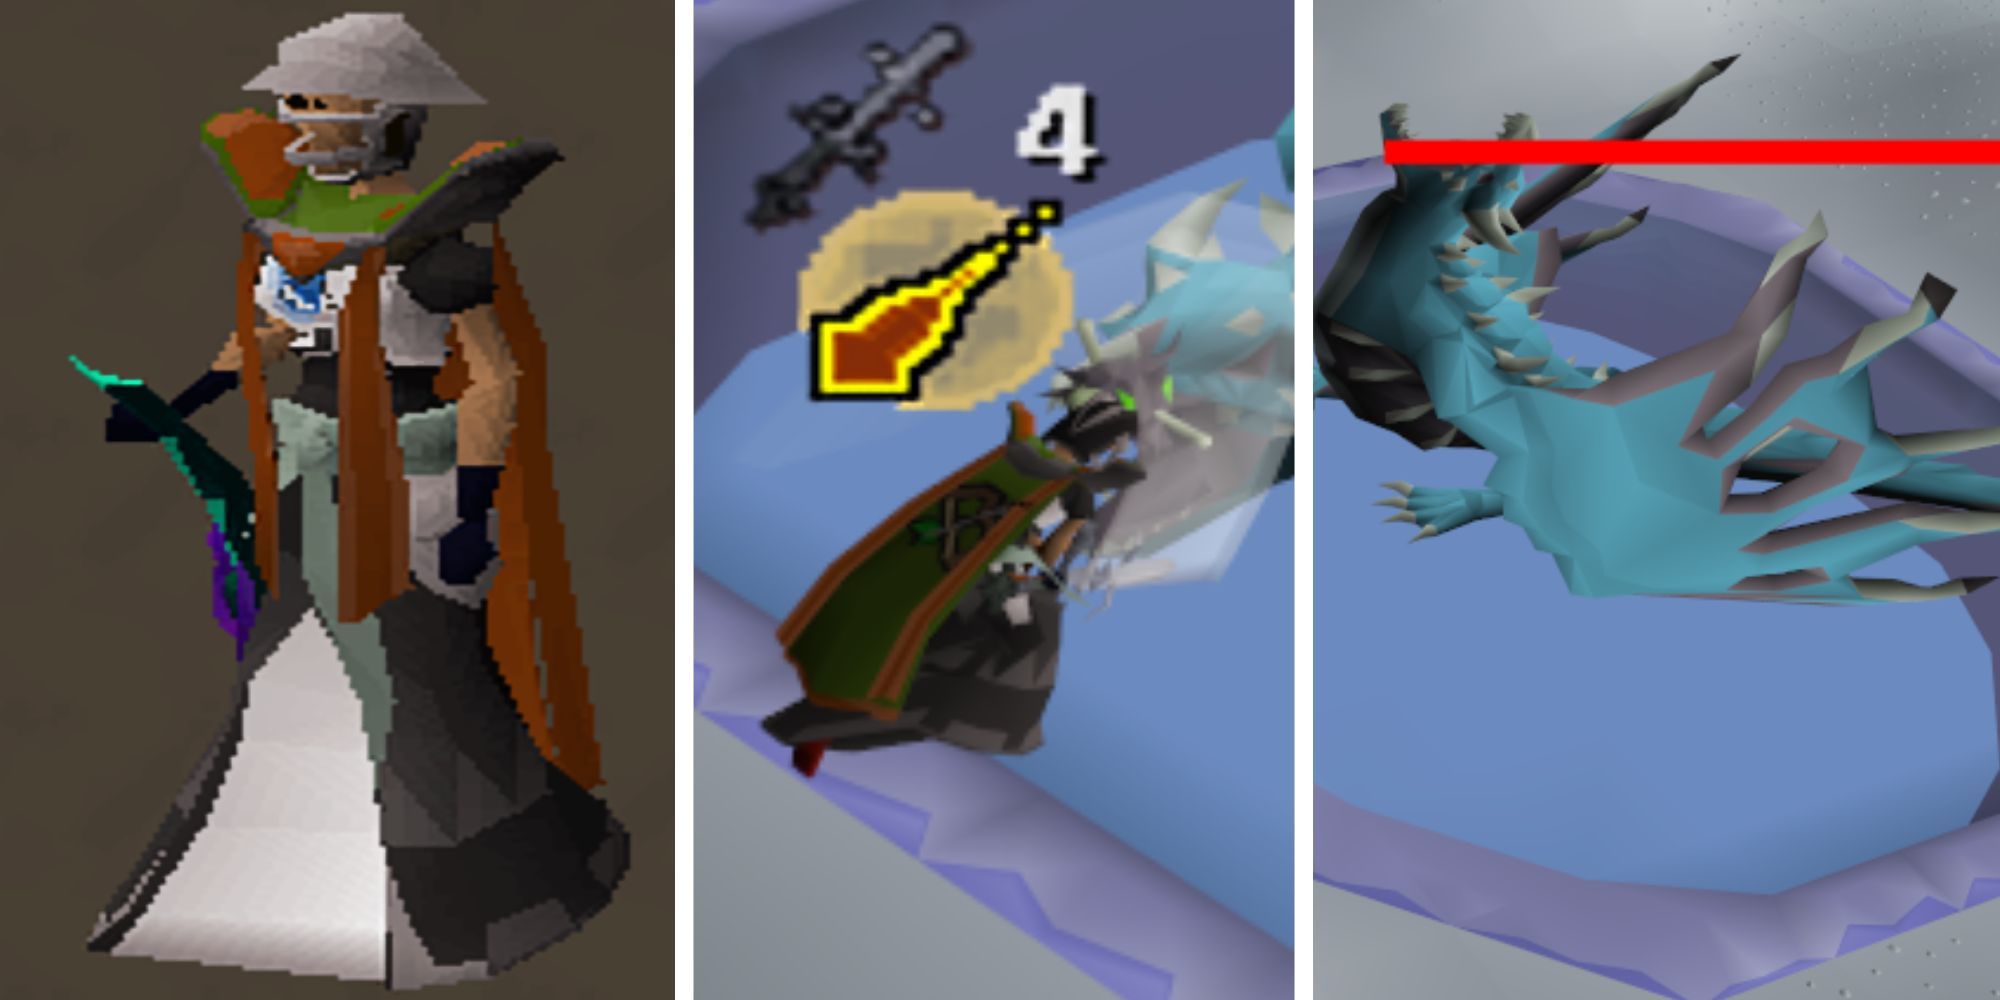 Player gearing up, fighting and defeating Vorkath in OSRS.